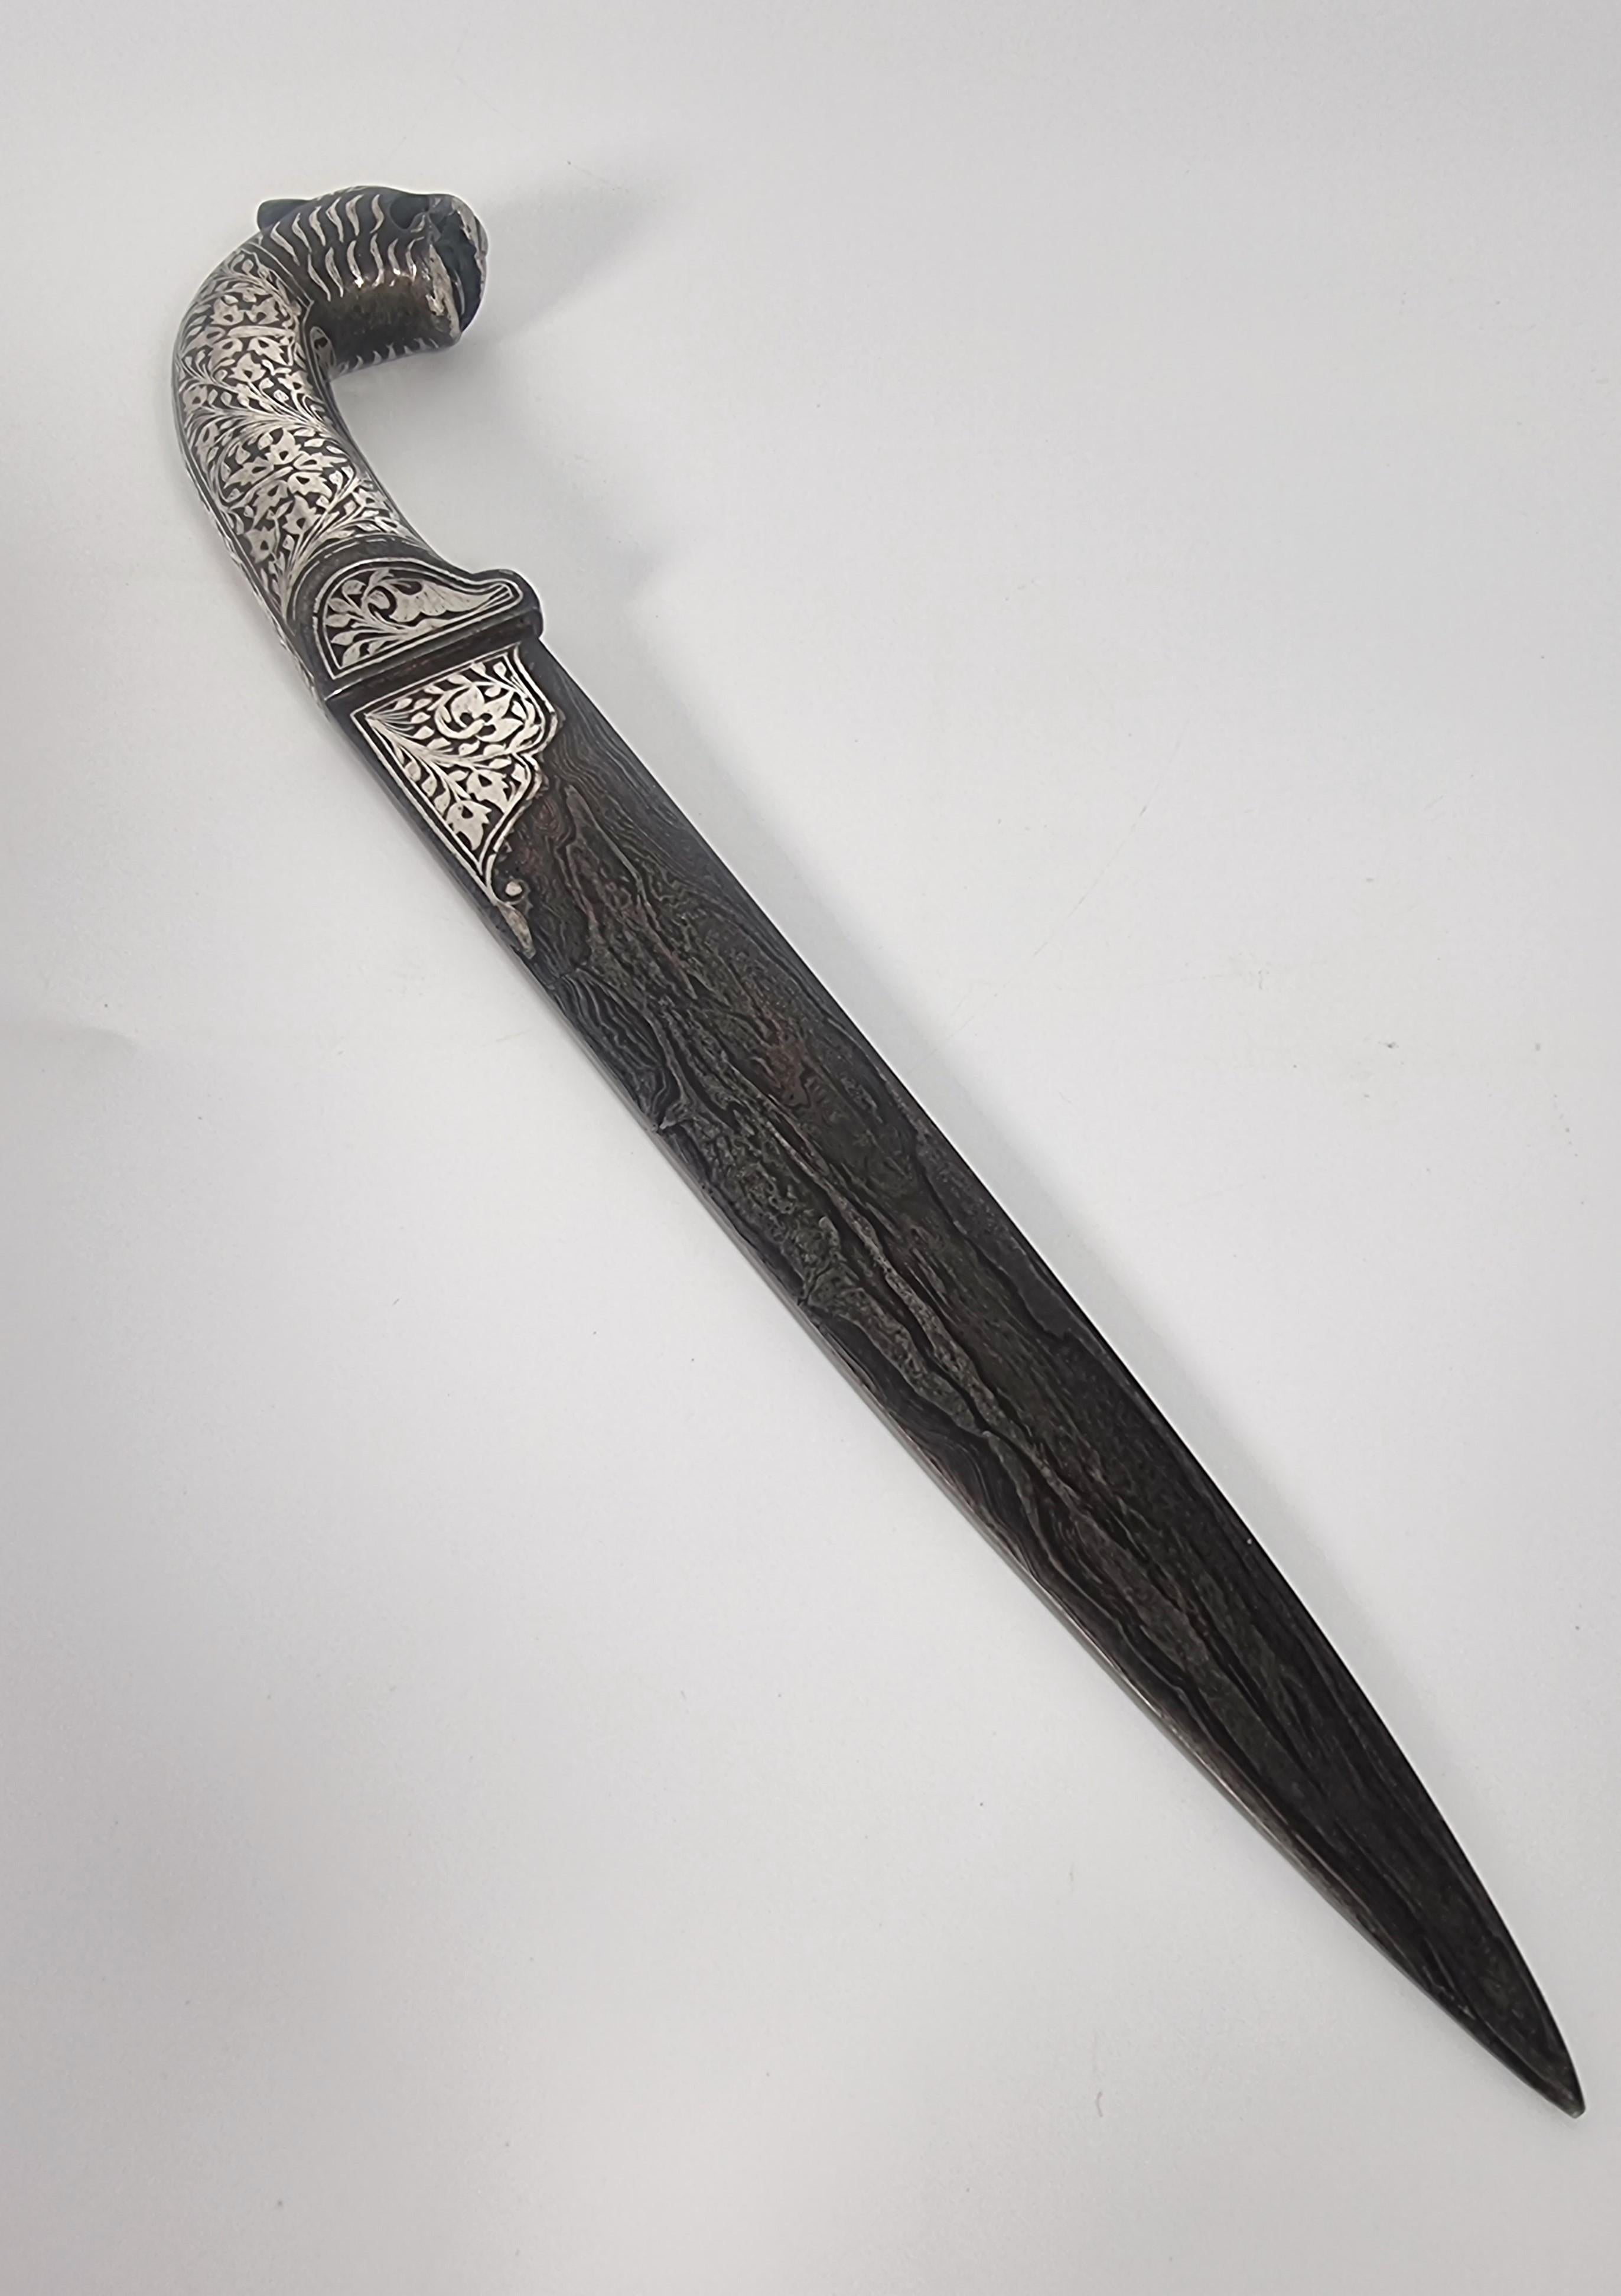 A fine 19th-century ornate Indian dagger superbly made from hand forged folded steel known as Damascus which shows on the blade with a pattern almost like wood grain.

The whole knife is made from solid steel and the handle is most elaborate with a